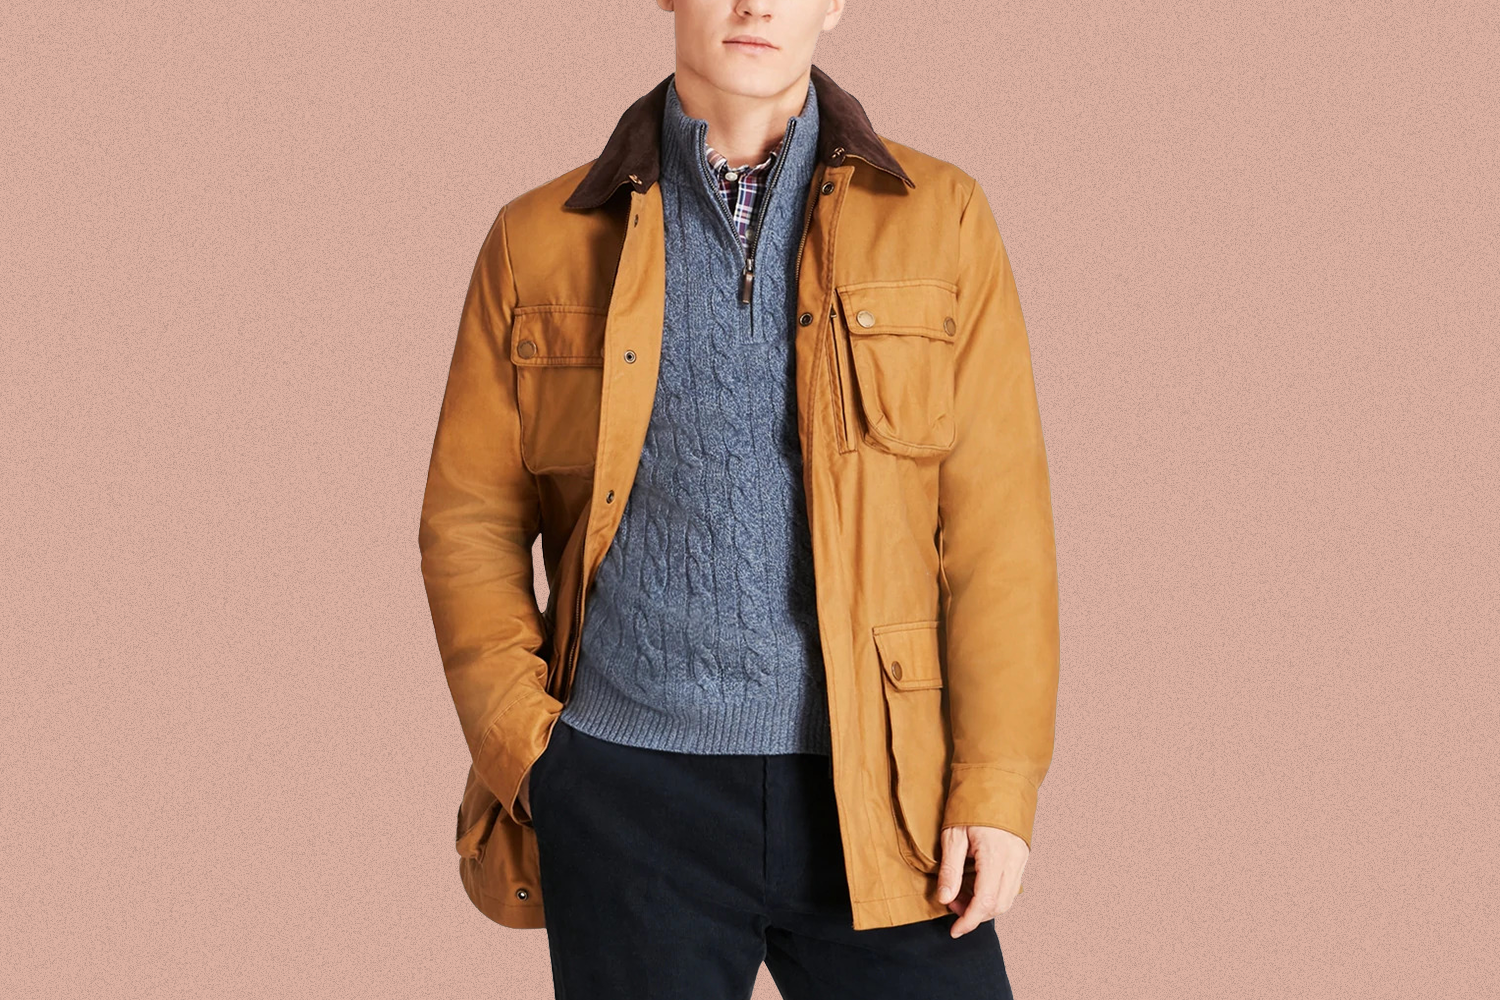 Brooks Quilted Jacket, Jackets, Outerwear